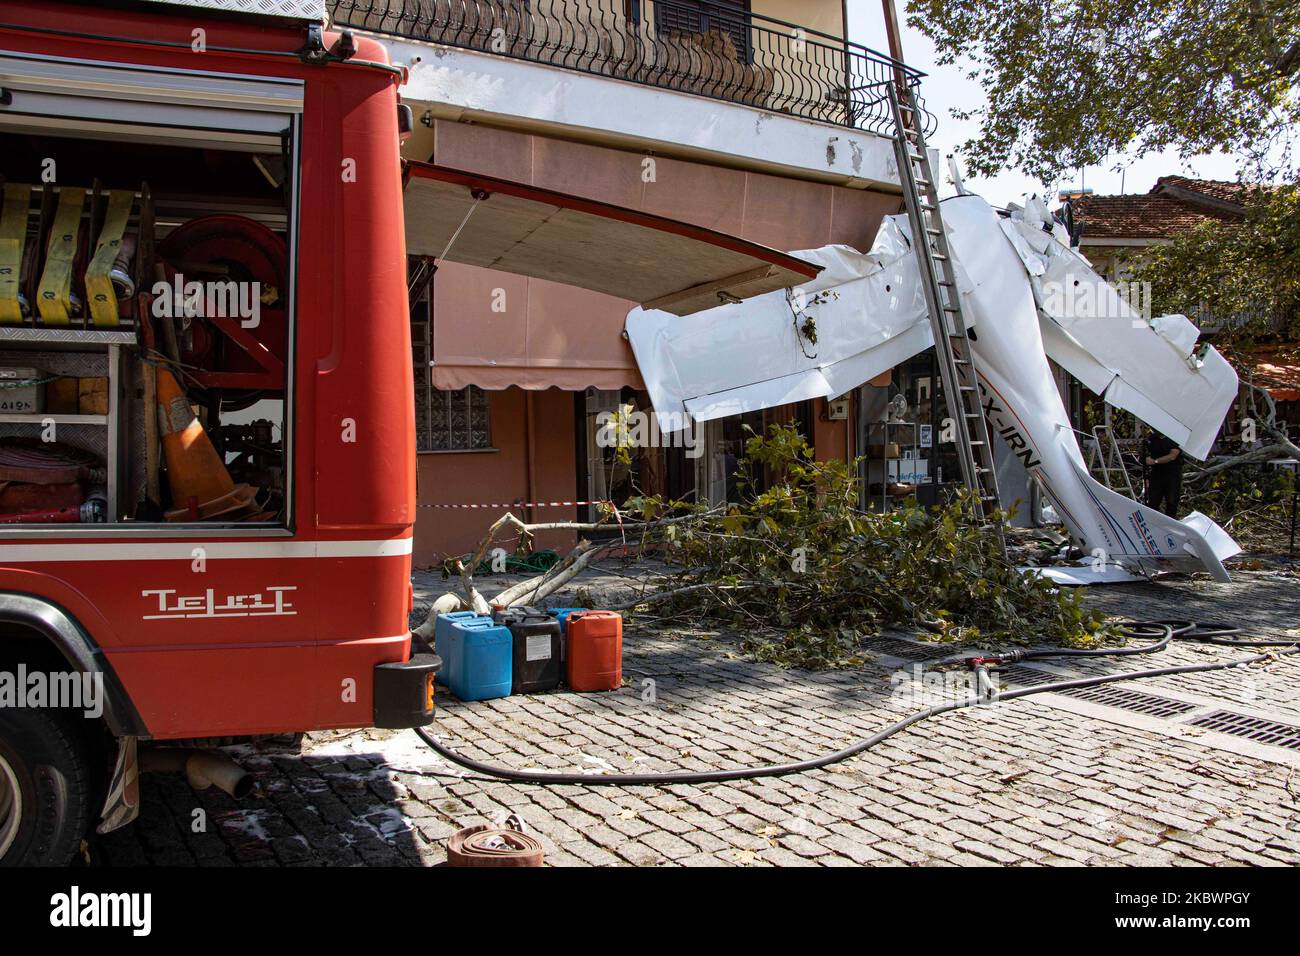 A small light aircraft of general aviation had an accident as it smashed onto a building in Proti Town in Serres region, after crashed hitting a tree, smashing the cockpit but the pilot survived with light injuries and was taken to hospital. The single-propeller airplane was an Italian made Tecnam P2008 model ( Tecnam P2008-JC Mk2 )with the registration SX-IRN belonging to SKIES AVIATION ACADEMY and the pilot was a student of the school flying his solo mission with low altitude flight. On August 3, 2020 in Proti Serron, Greece. (Photo by STR/NurPhoto) Stock Photo